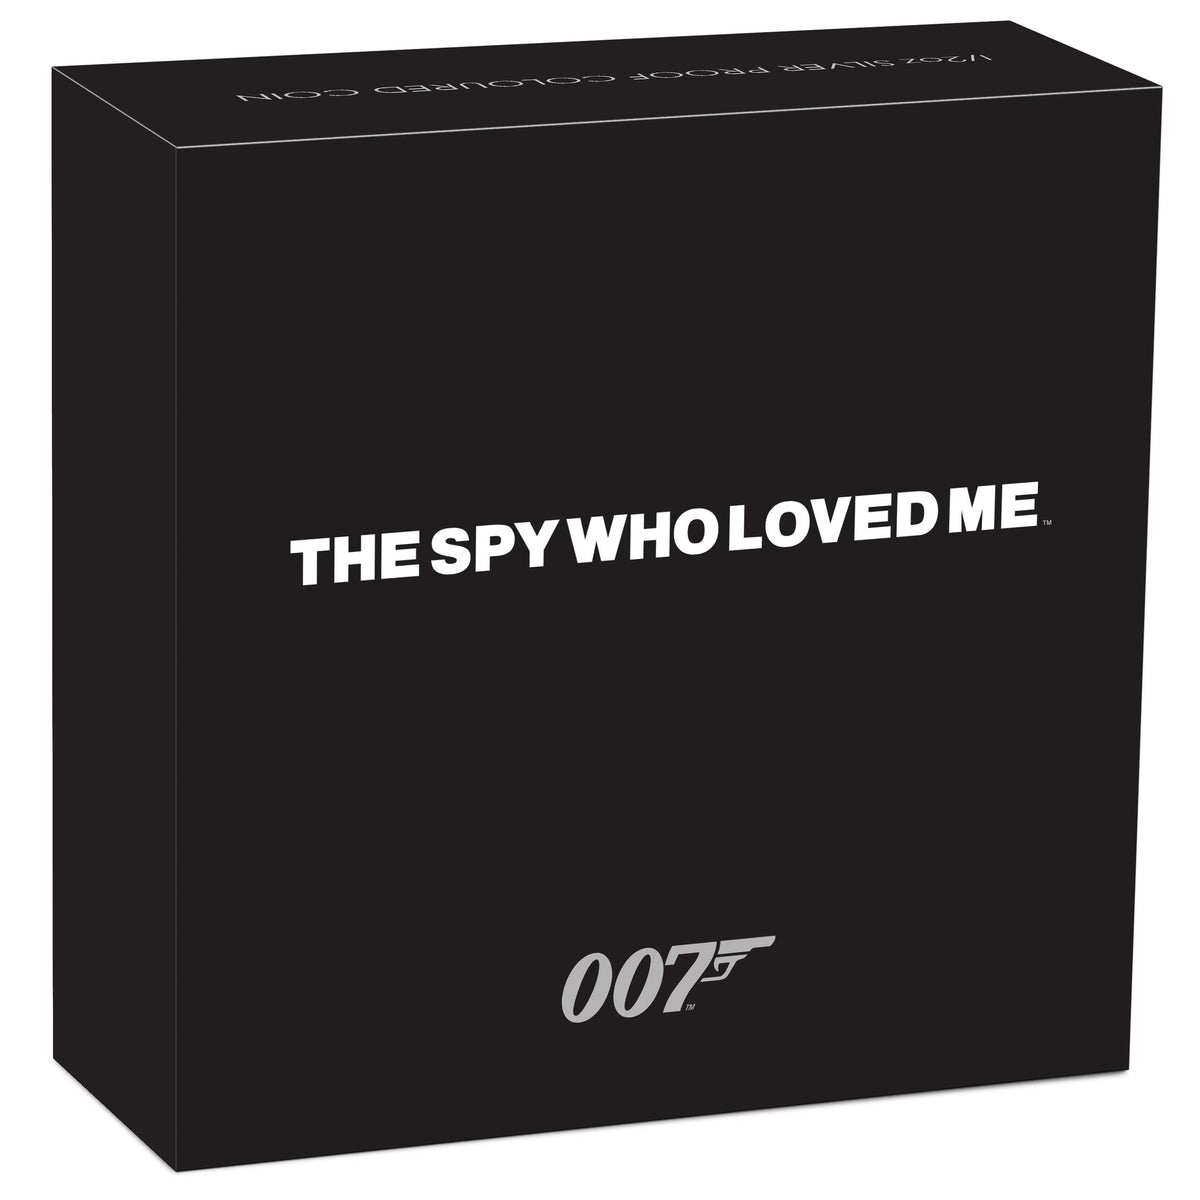 James Bond The Spy Who Loved Me 1/2 oz Silver Proof Coin - By The Perth Mint SCOIN PERTH MINT 